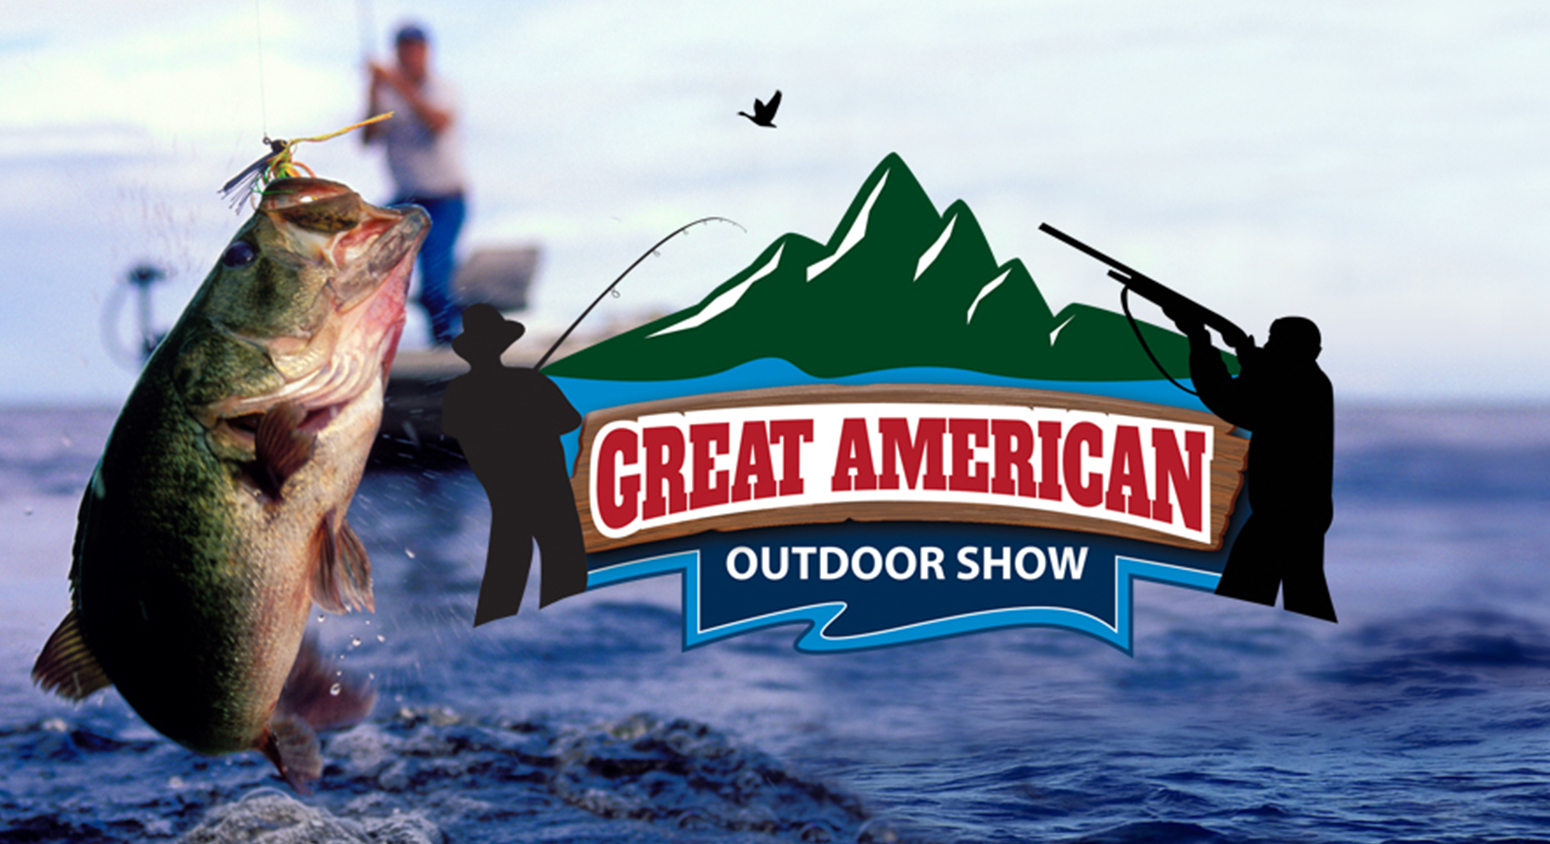 Great American Outdoor Show Events: Friday, February 12th